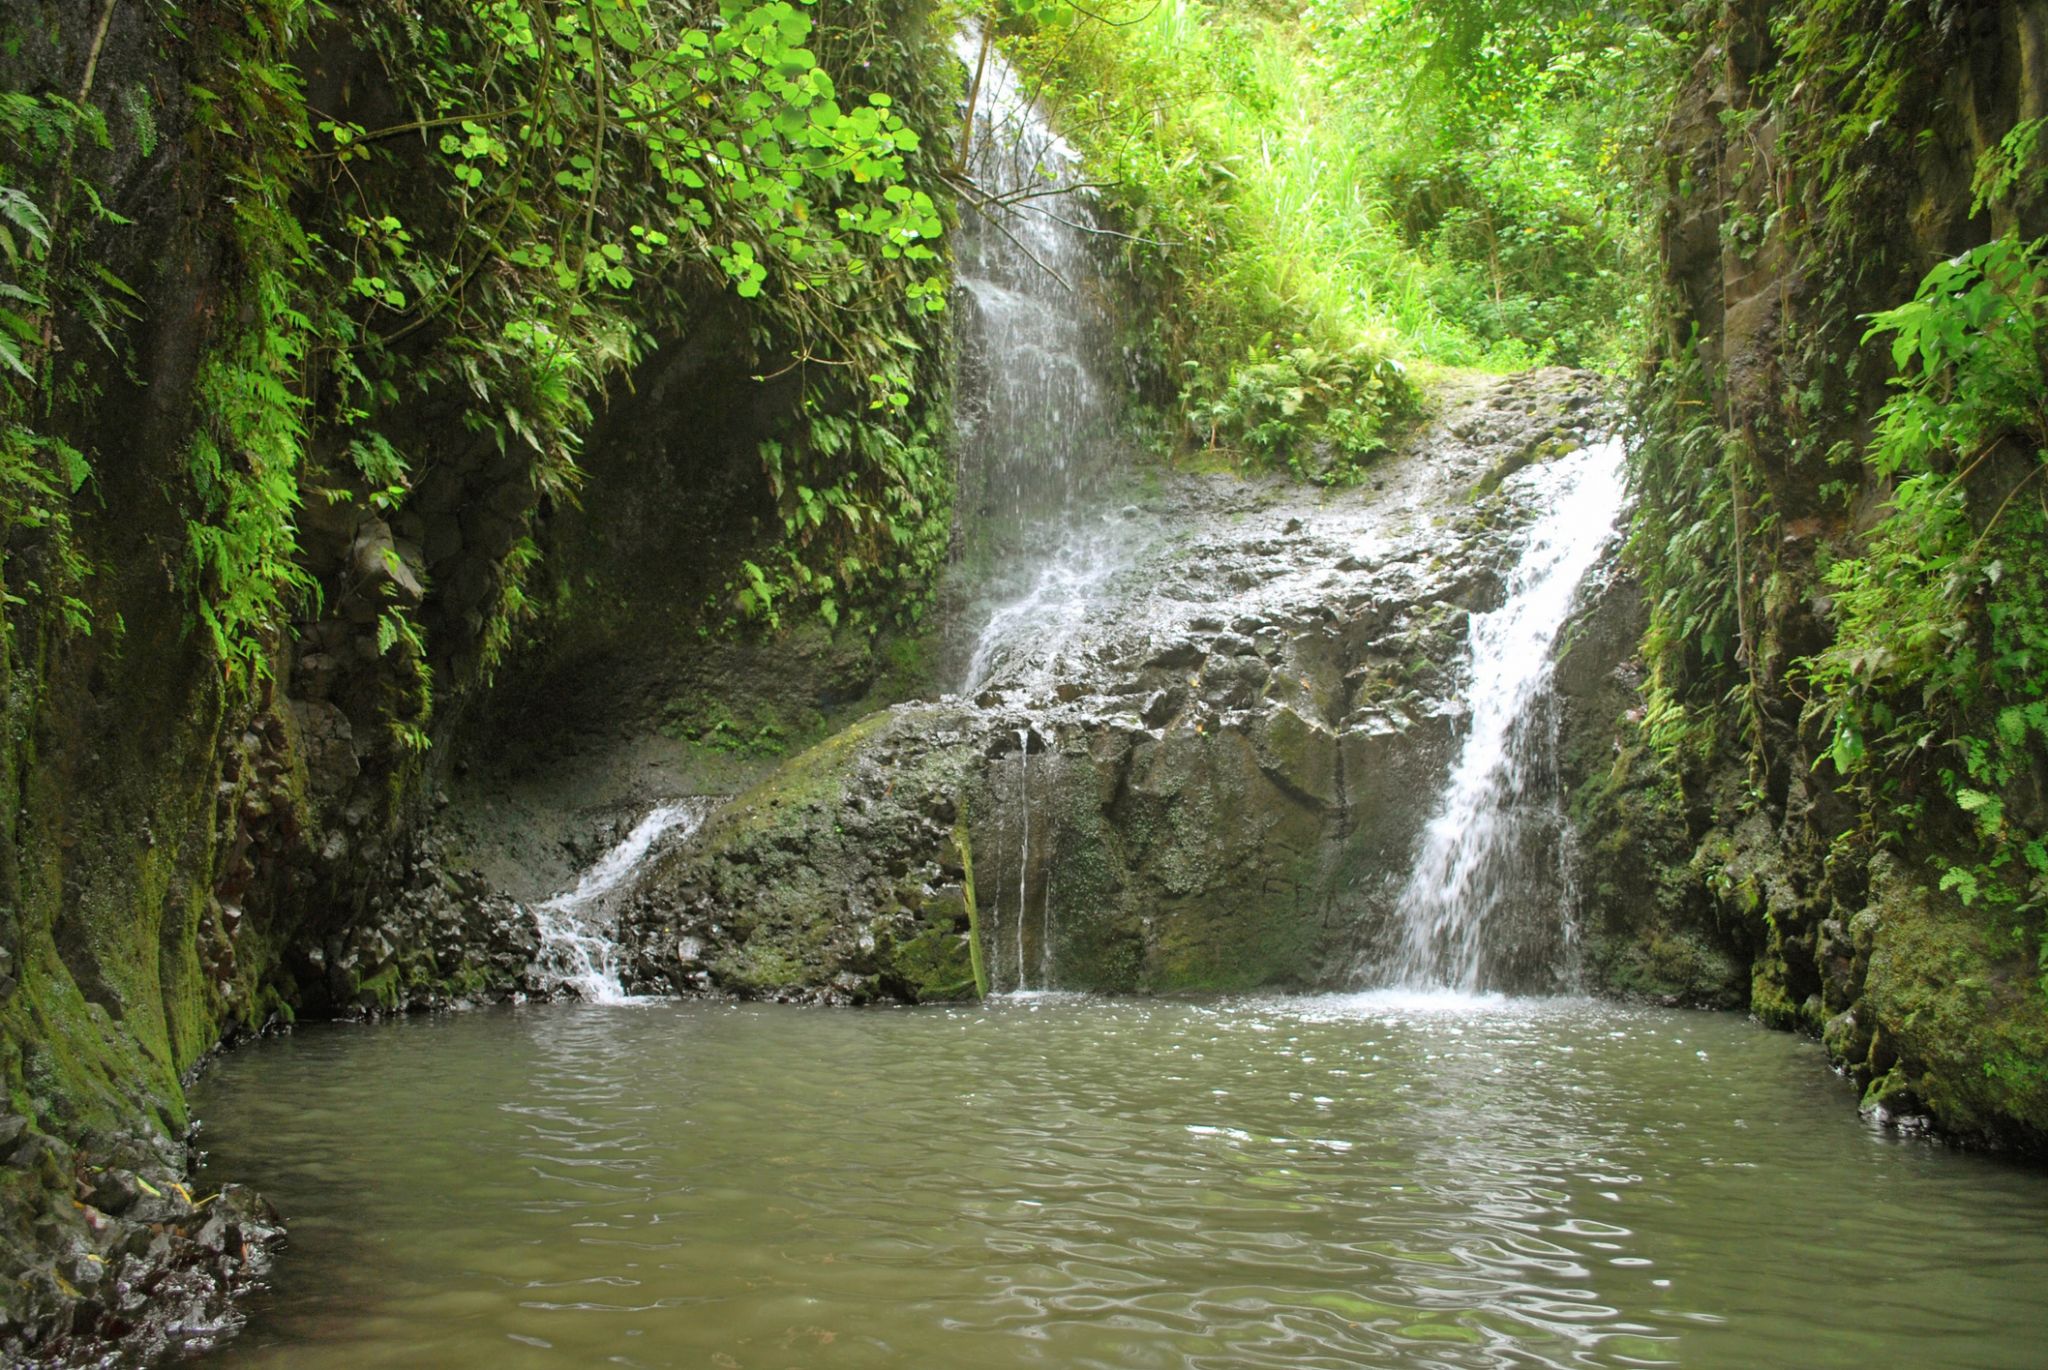 After too many visitors, Maunawili Falls trail in Hawaii is closing for